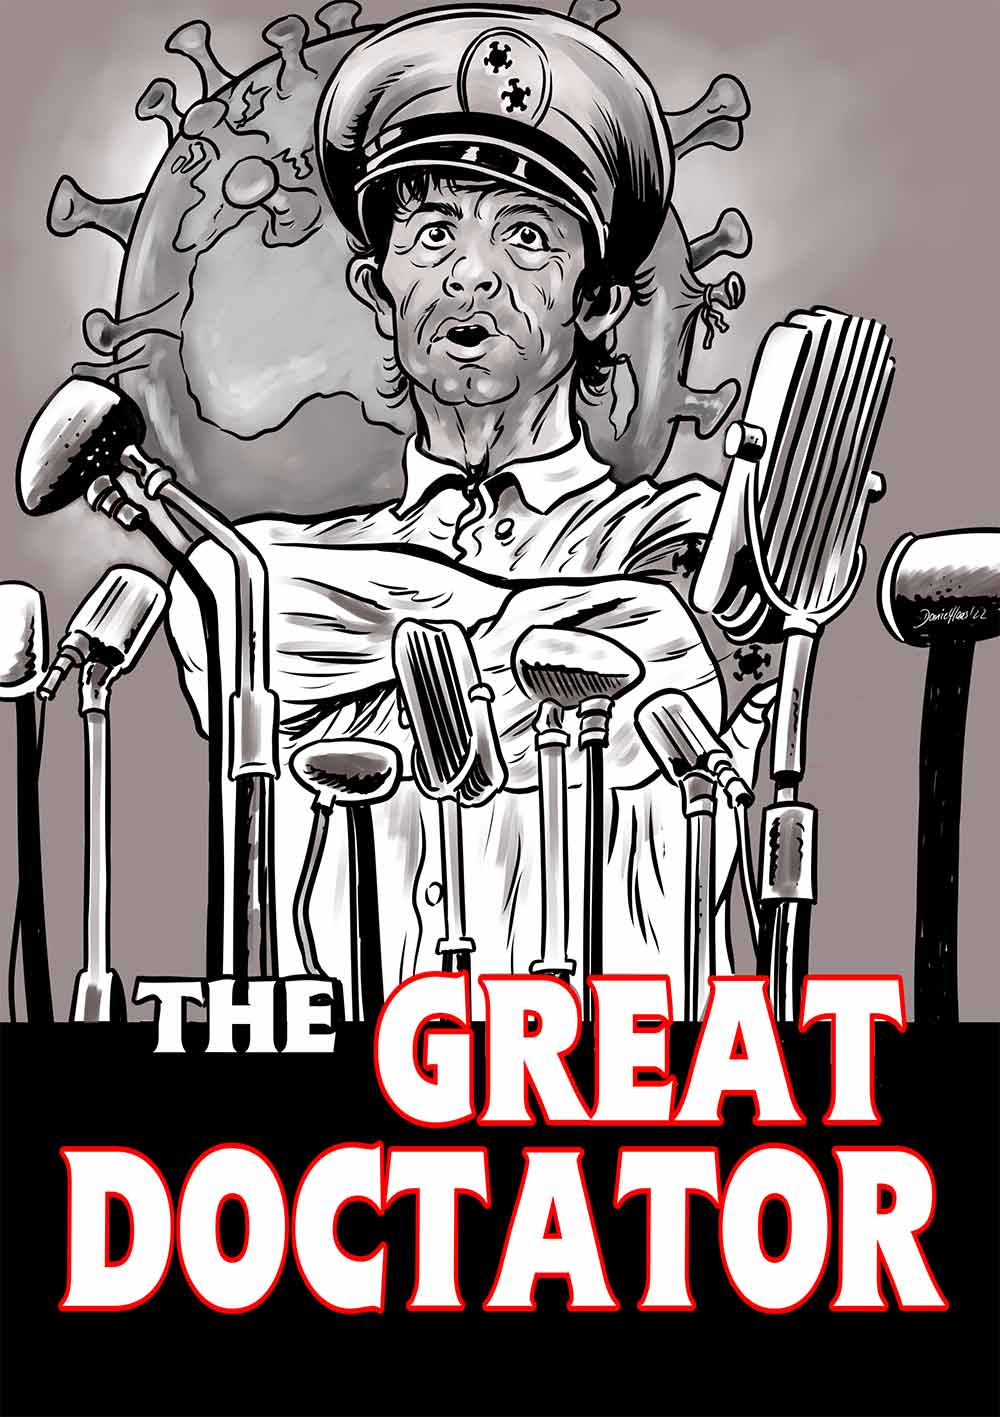 The great Doctator - Poster